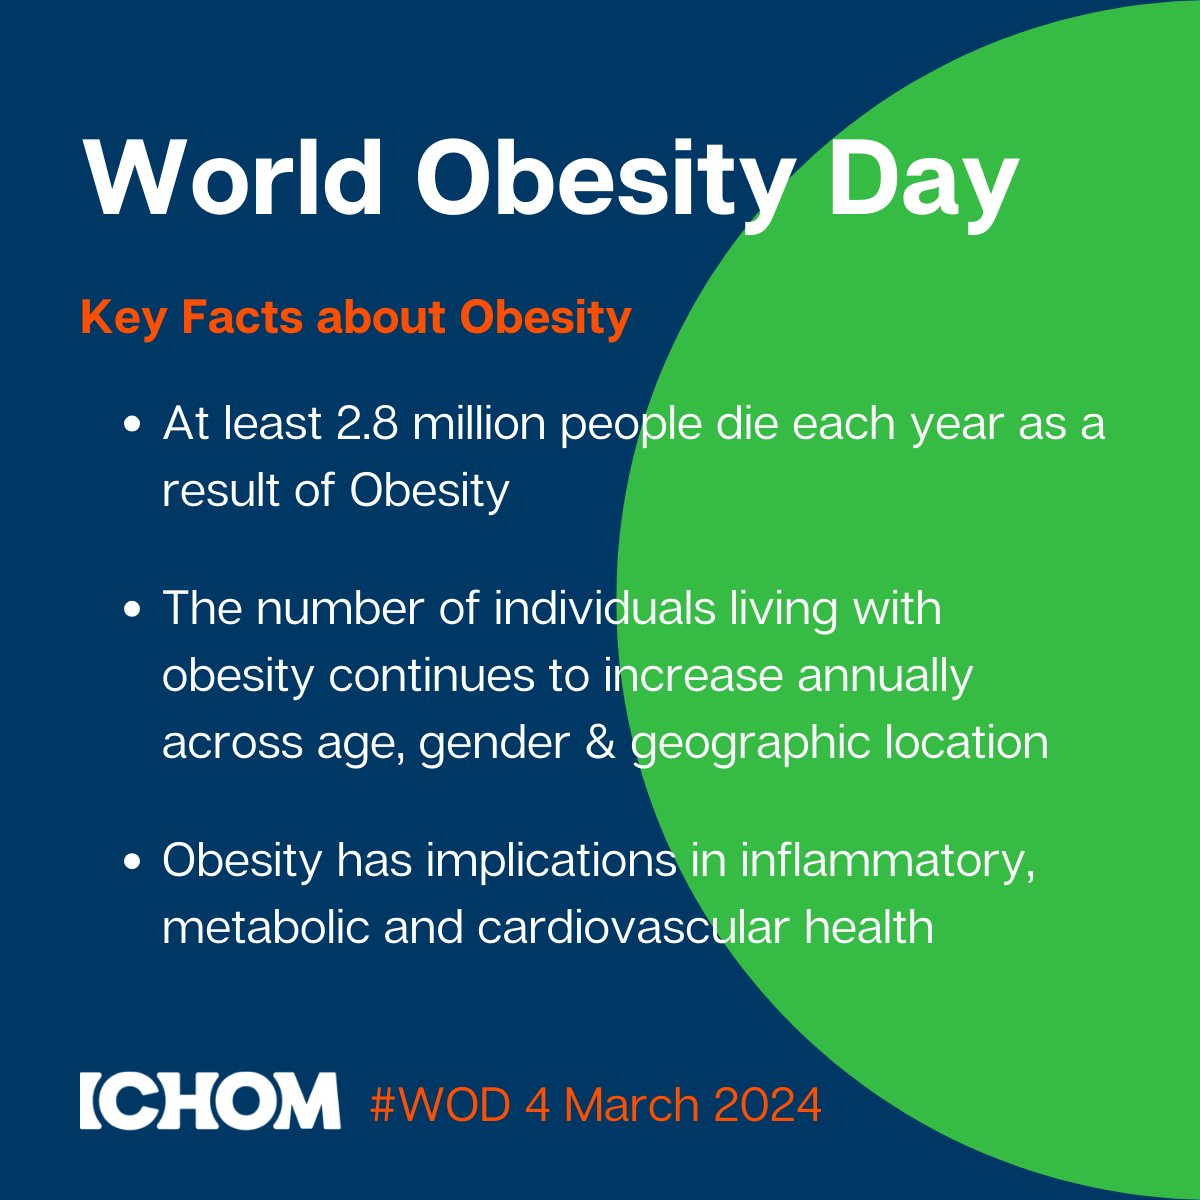 This World Obesity Day, we want to shine light on the work we are doing at ICHOM to develop our Obesity Set, a standardized definition of patient outcomes & how to measure them. Participate in the ICHOM patient validation survey: bit.ly/49WFwiX